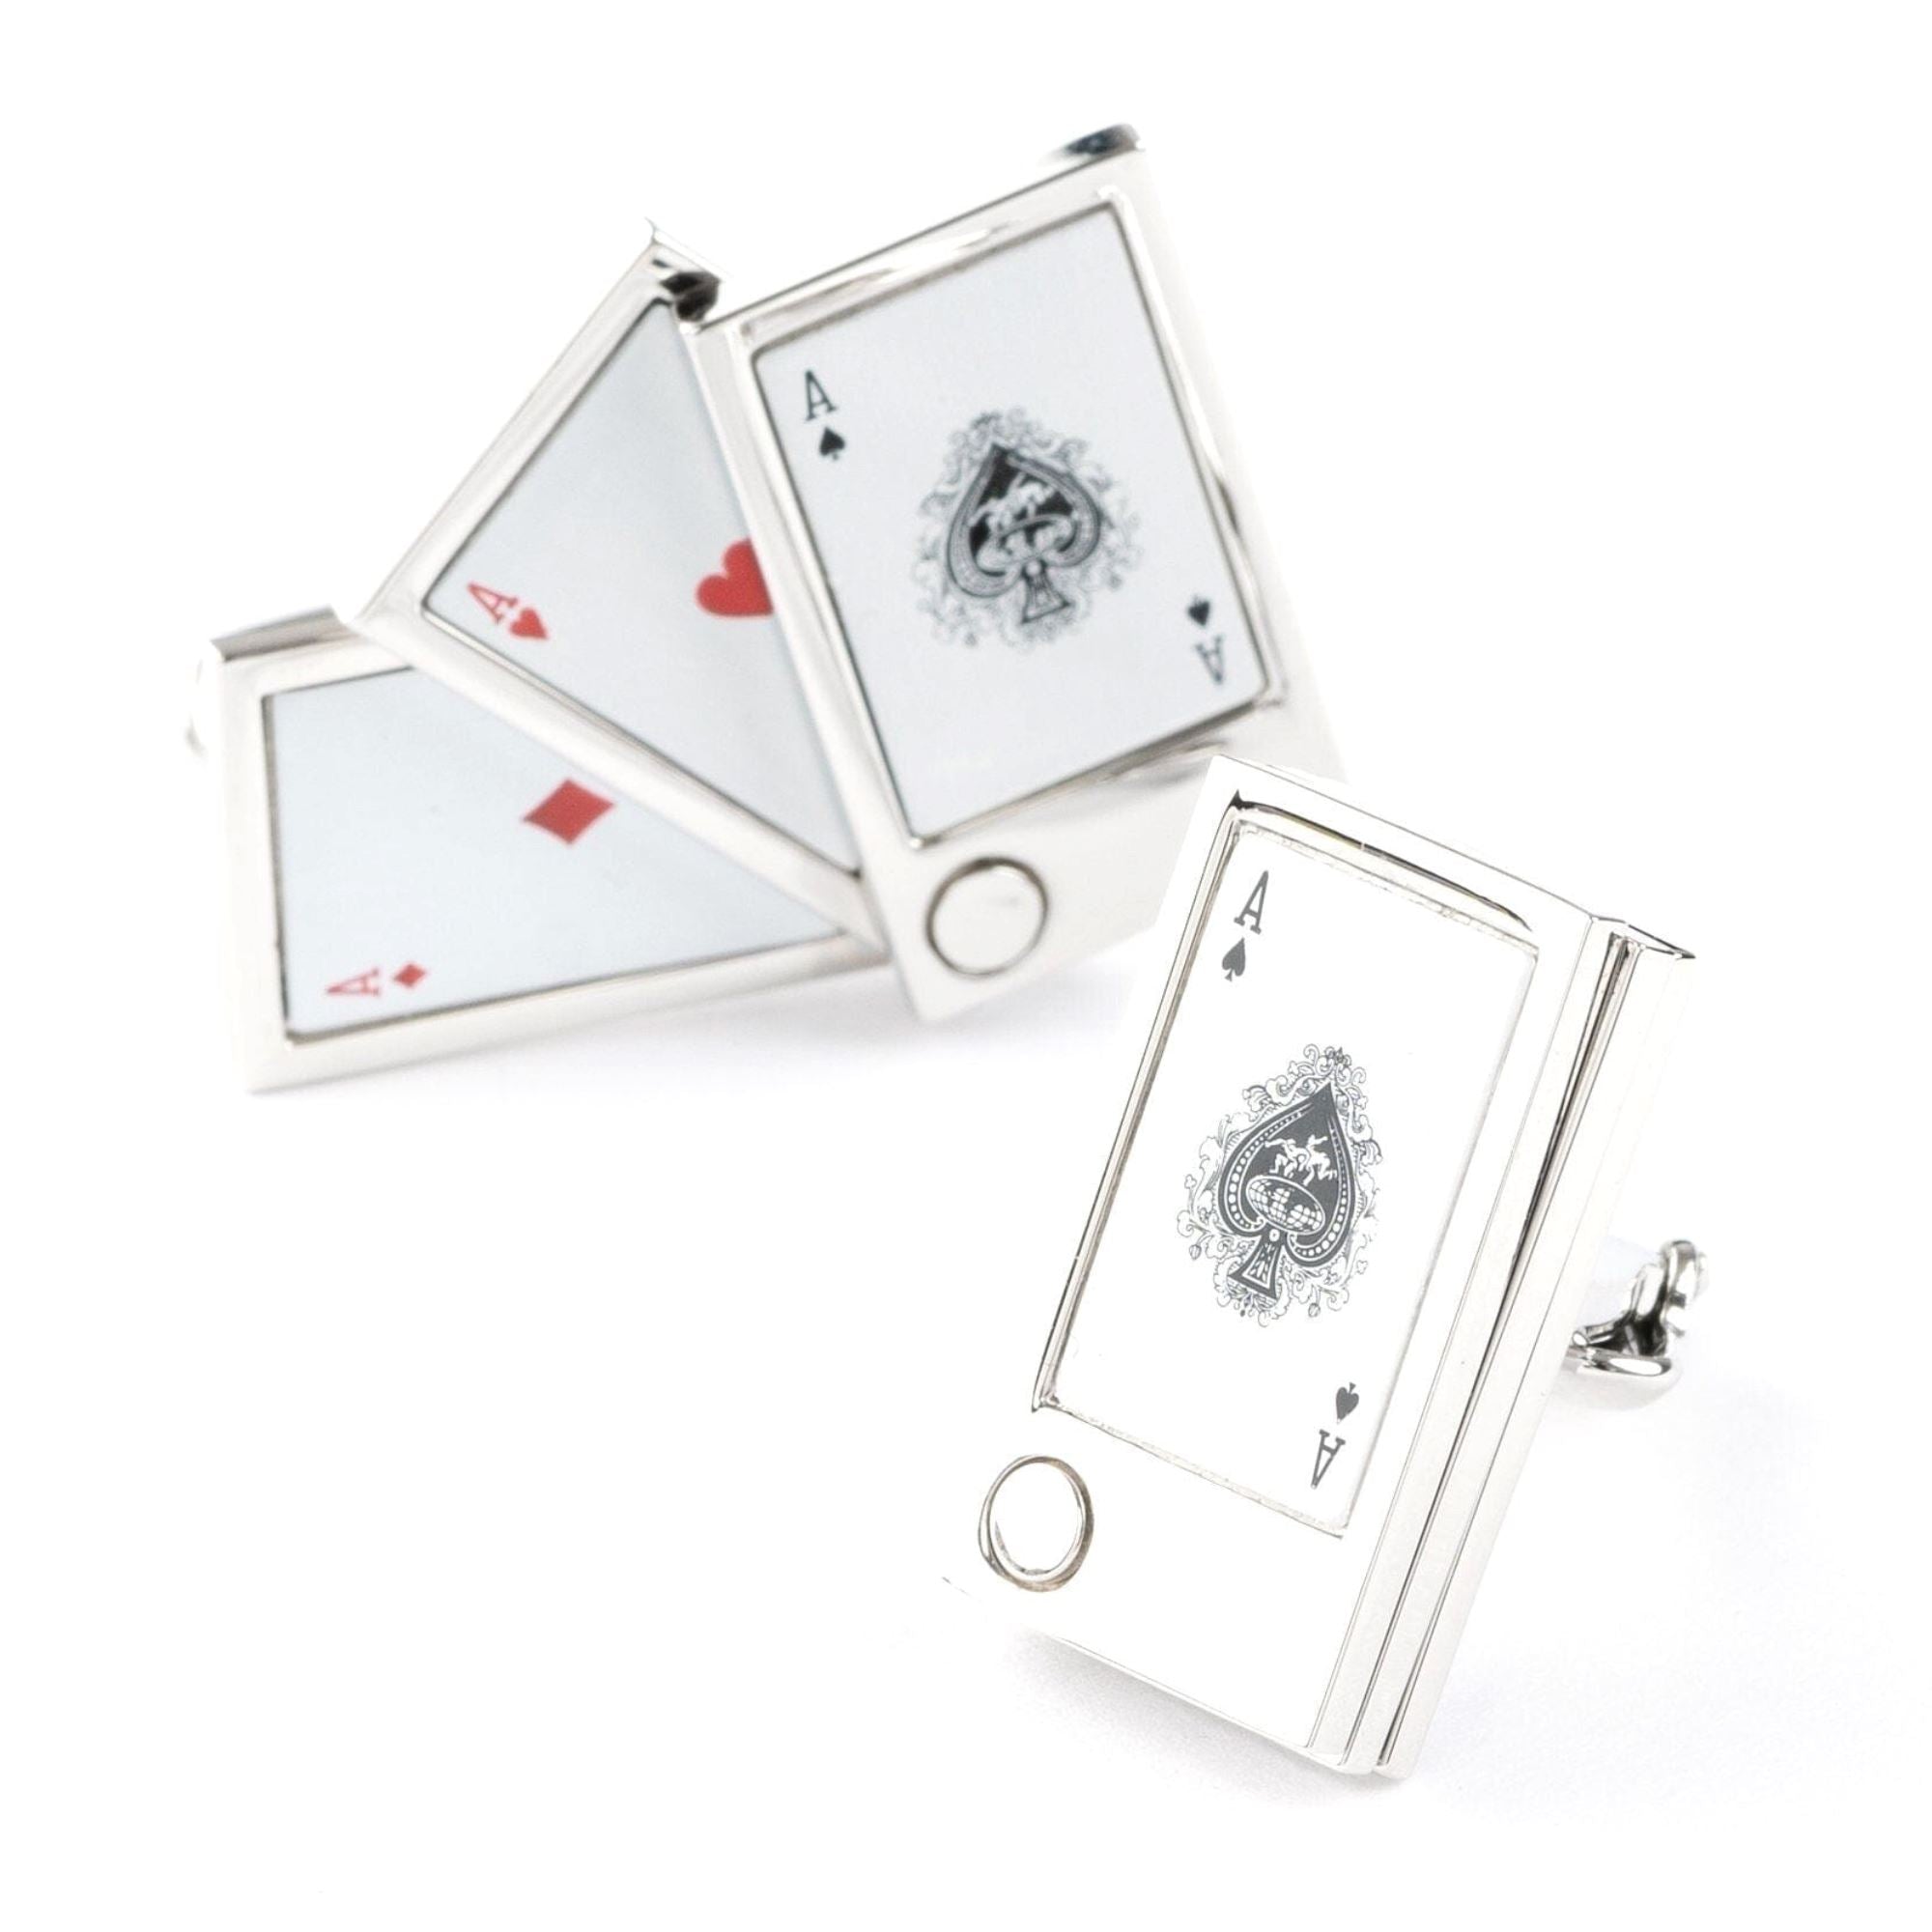 "Flip Out" Playing Cards Cufflinks Novelty Cufflinks Clinks Australia "Flip Out" Playing Cards Cufflinks 